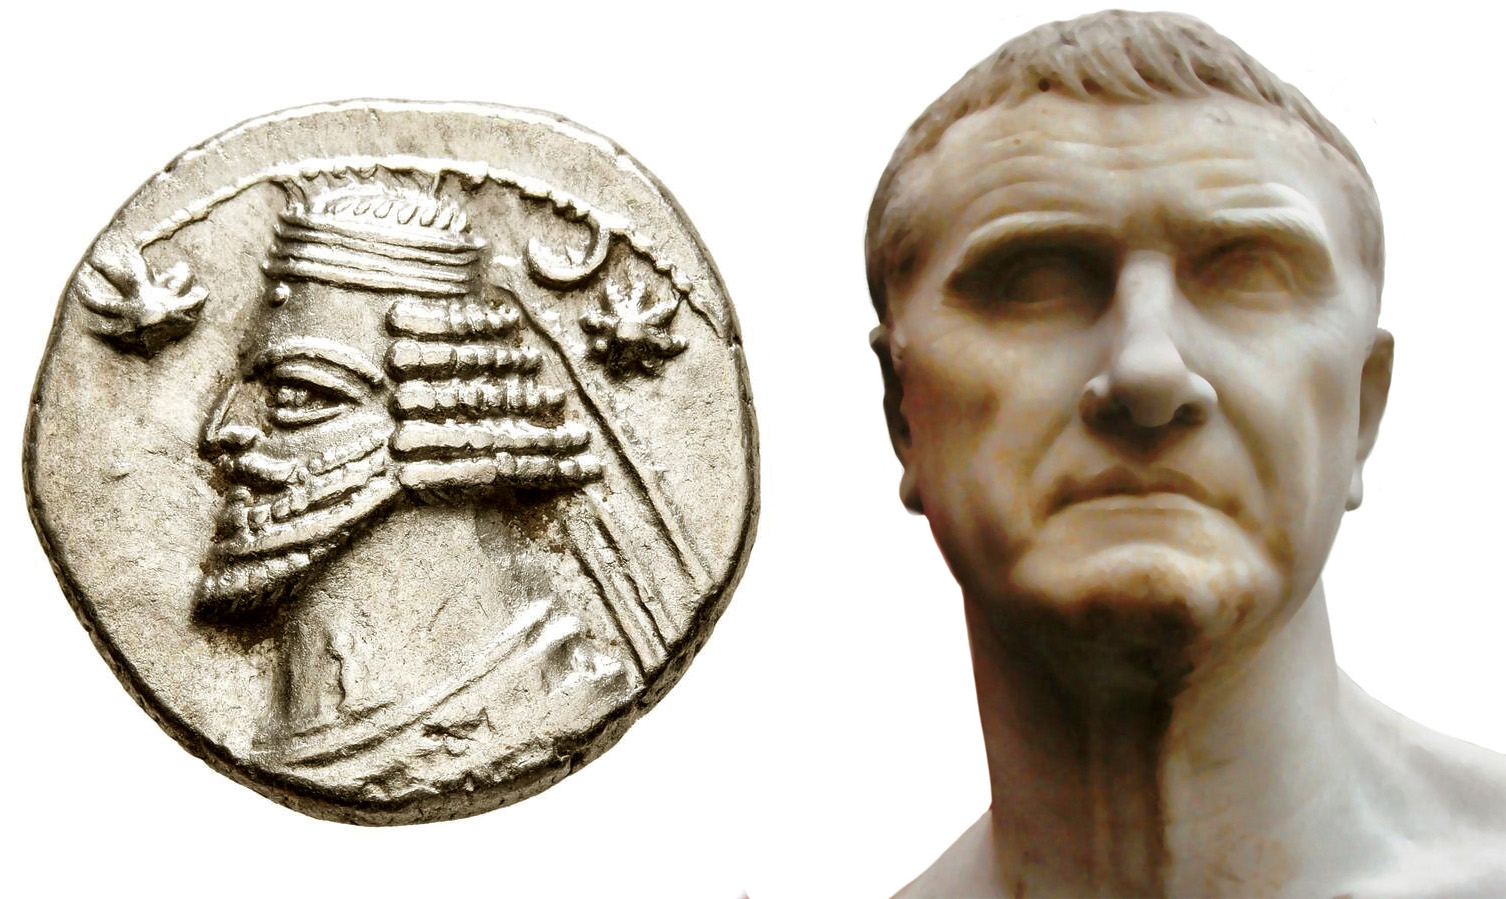 Triumvir Marcus Licinius Crassus (right) sought fame and fortune at the expense of the Parthians. Parthian King Orodes II, sent his renowned general Surena to conduct raids, reconnoiter the Roman garrisons, and harass Crassus’ army. 